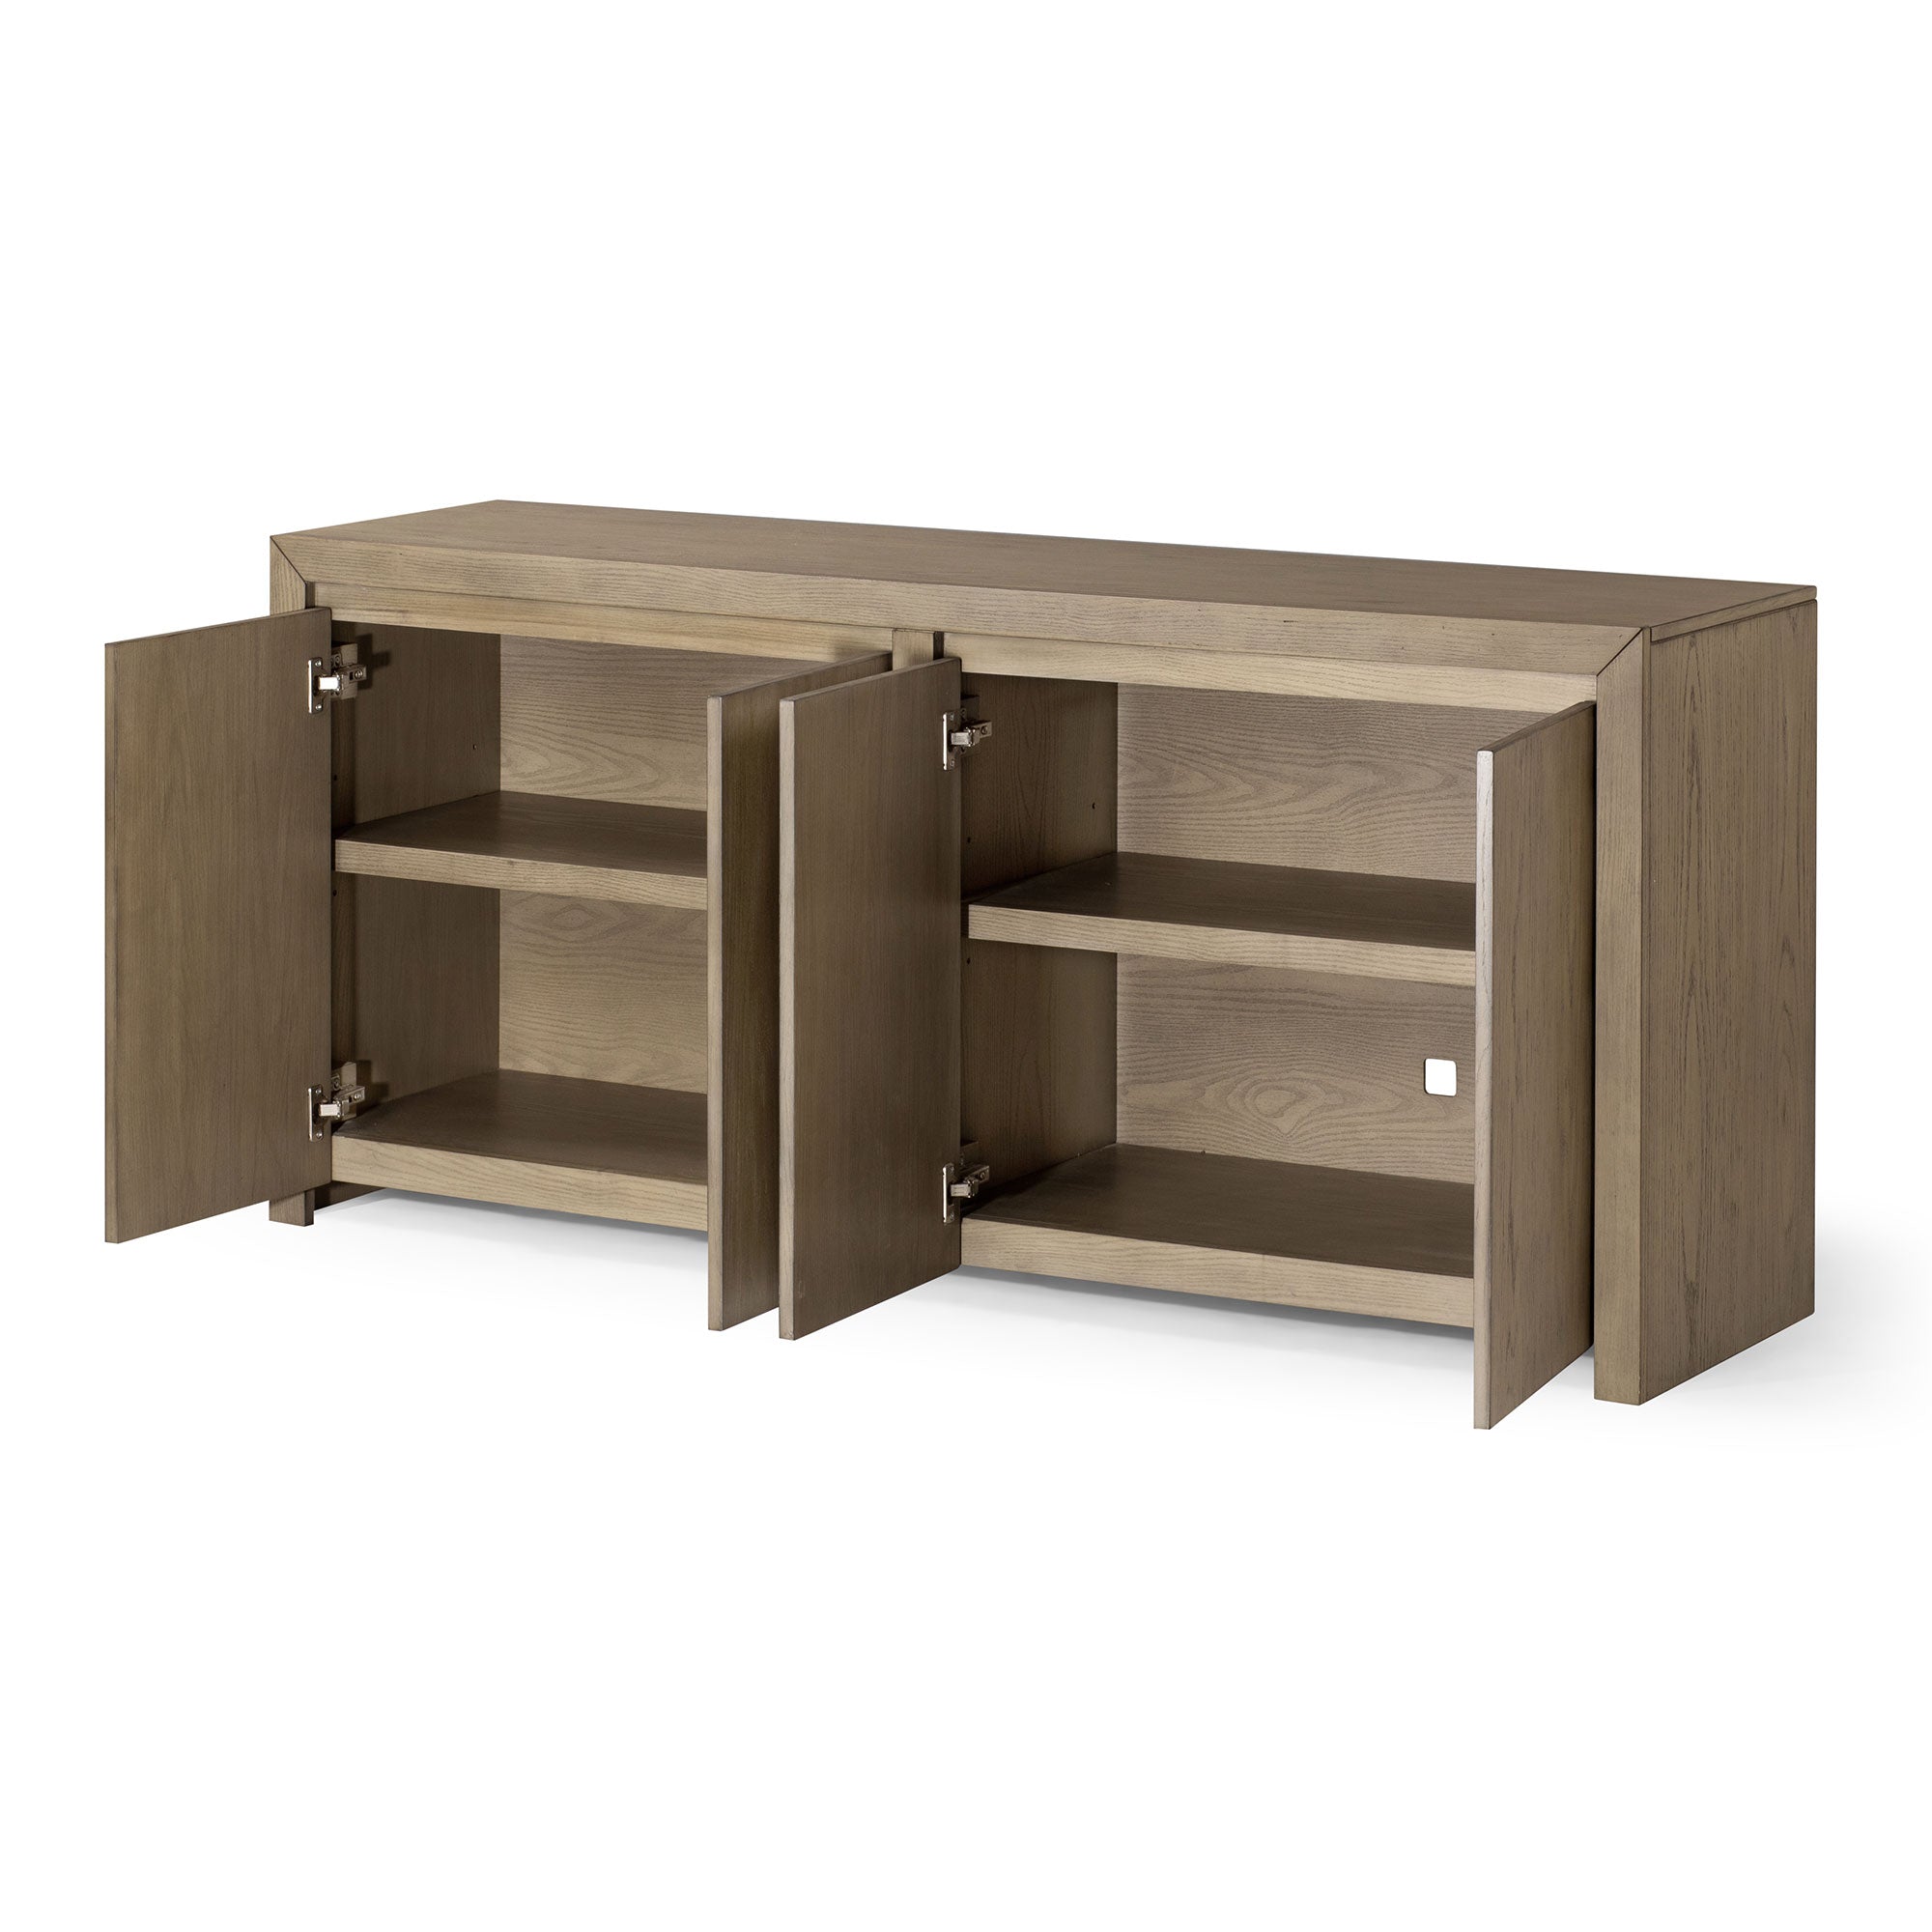 Iris Contemporary Wooden Sideboard in Refined Grey Finish in Cabinets by Maven Lane